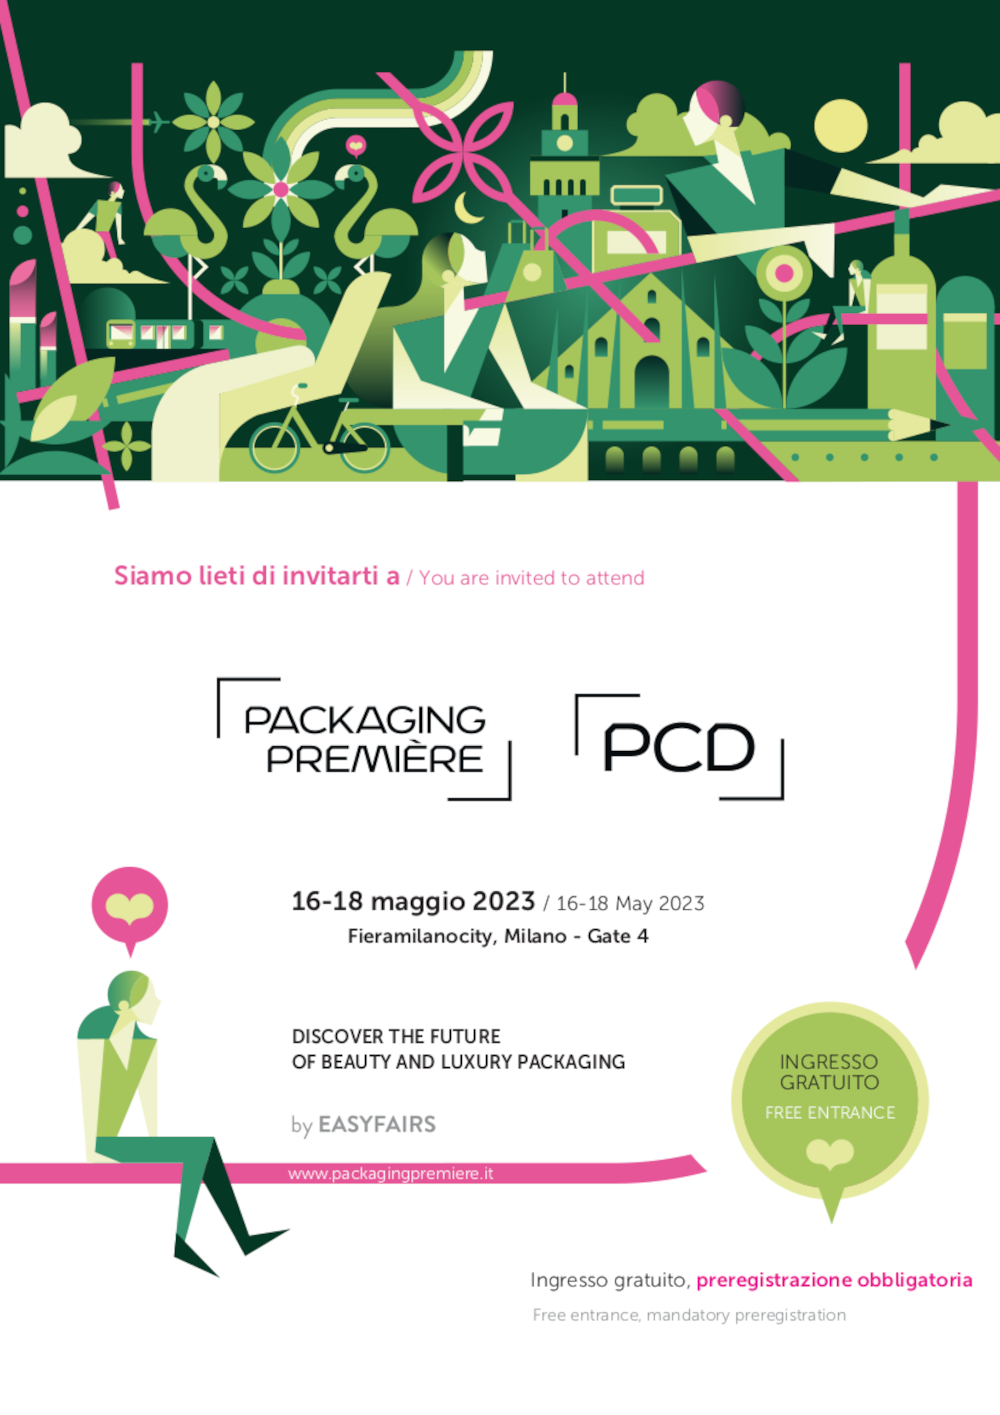 Packaging Première in Milan from 16/05 to 18/05